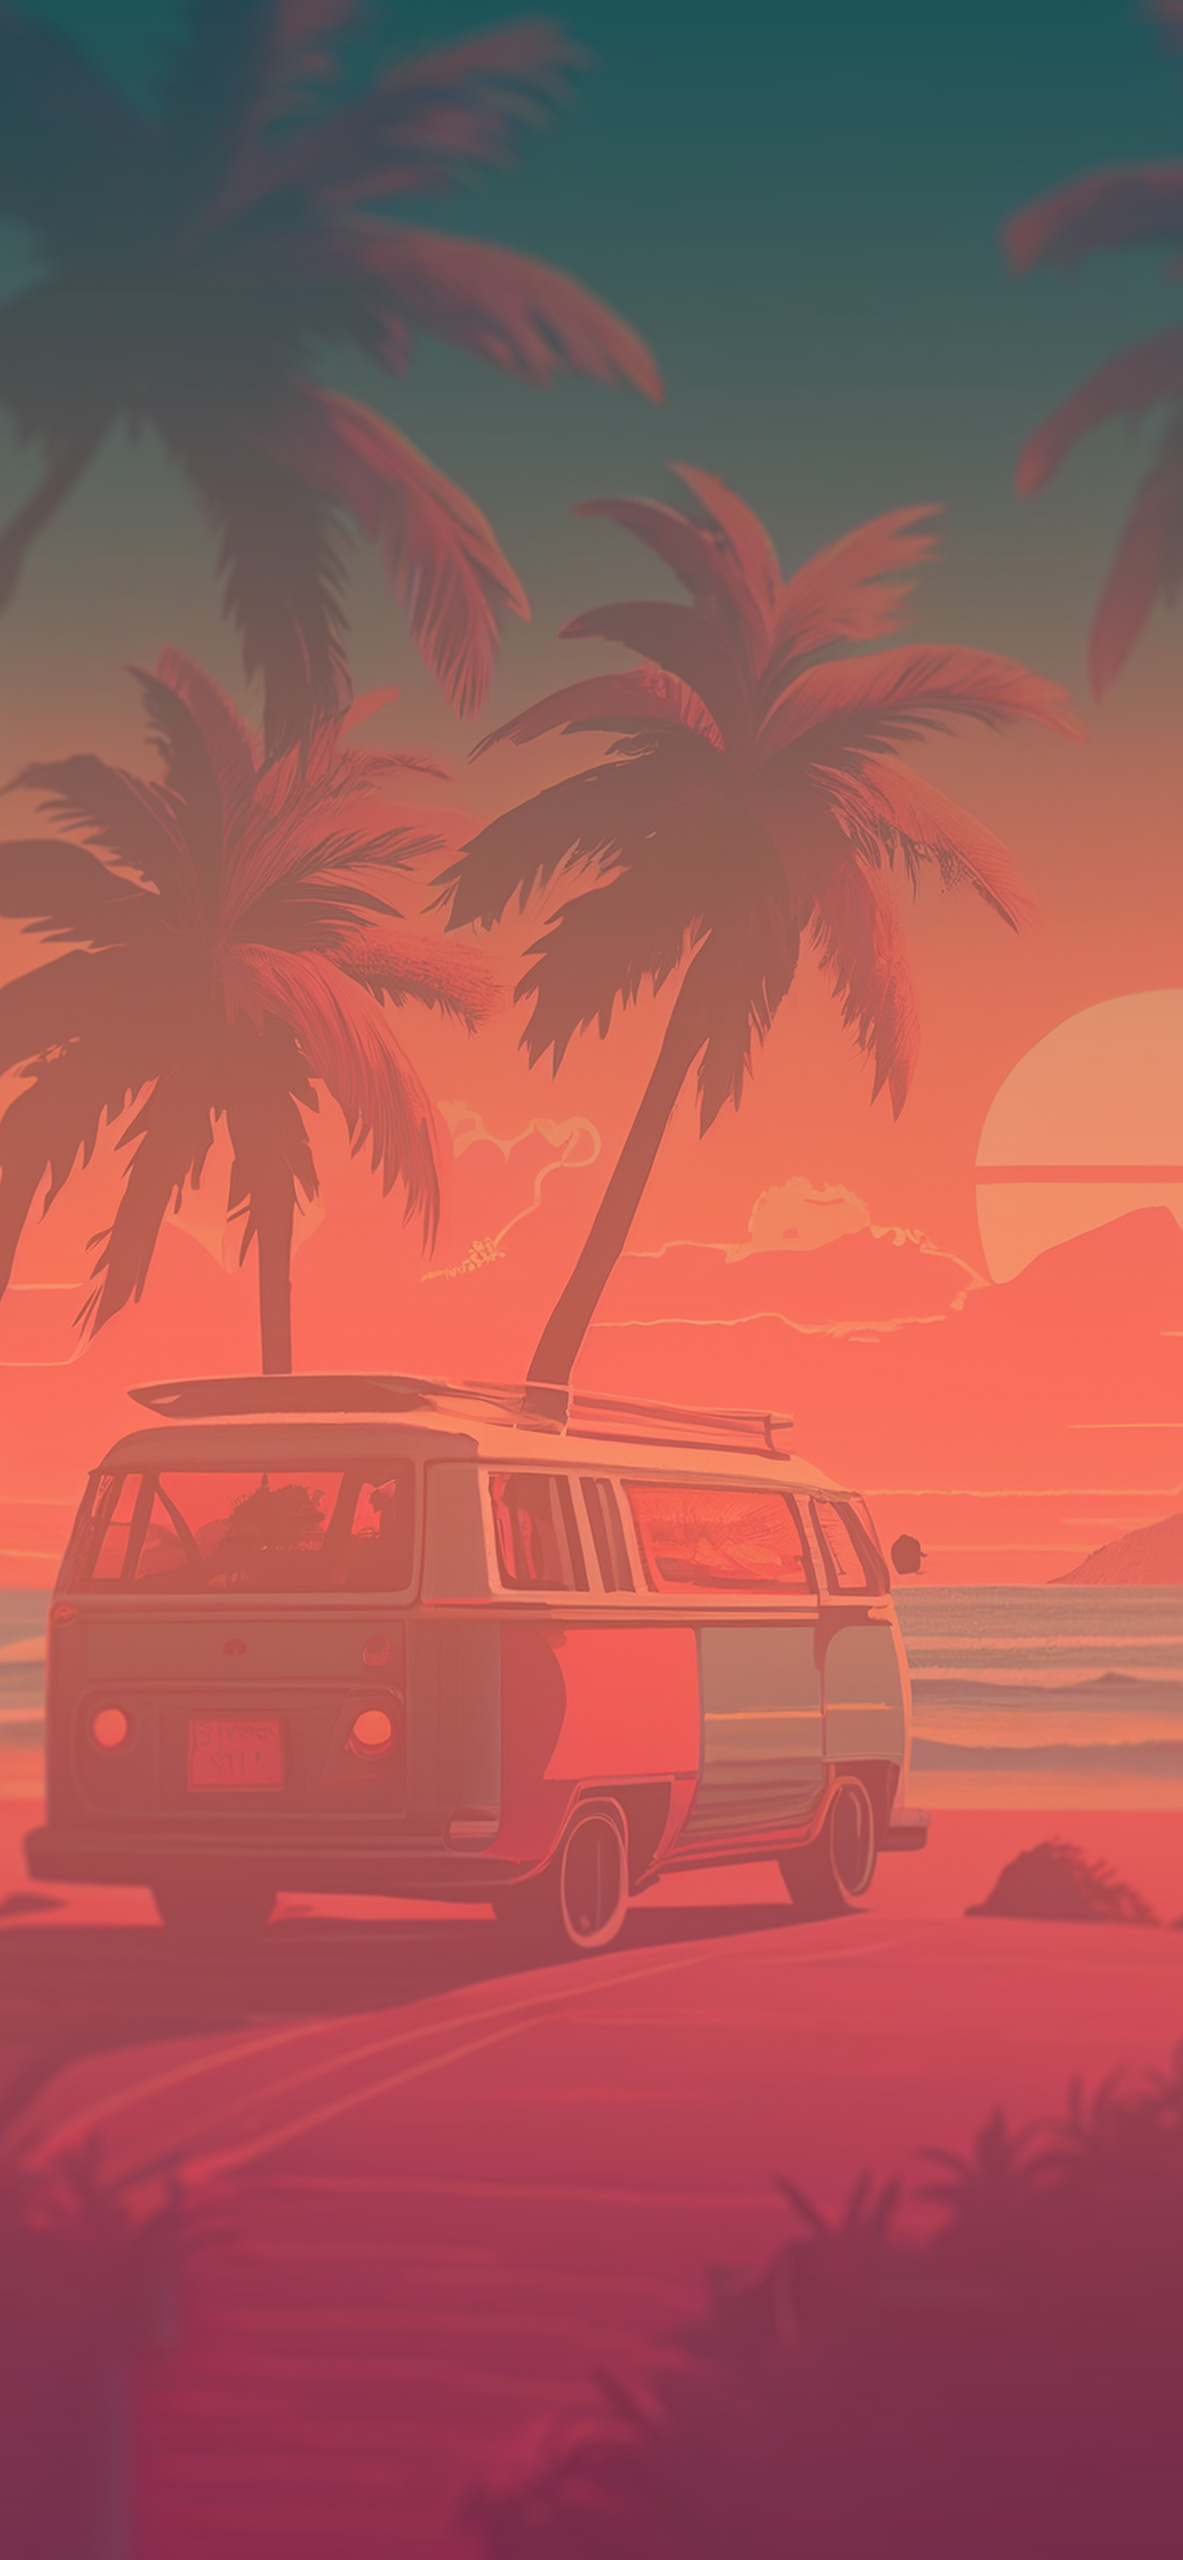 microbus on the beach summer aesthetic background